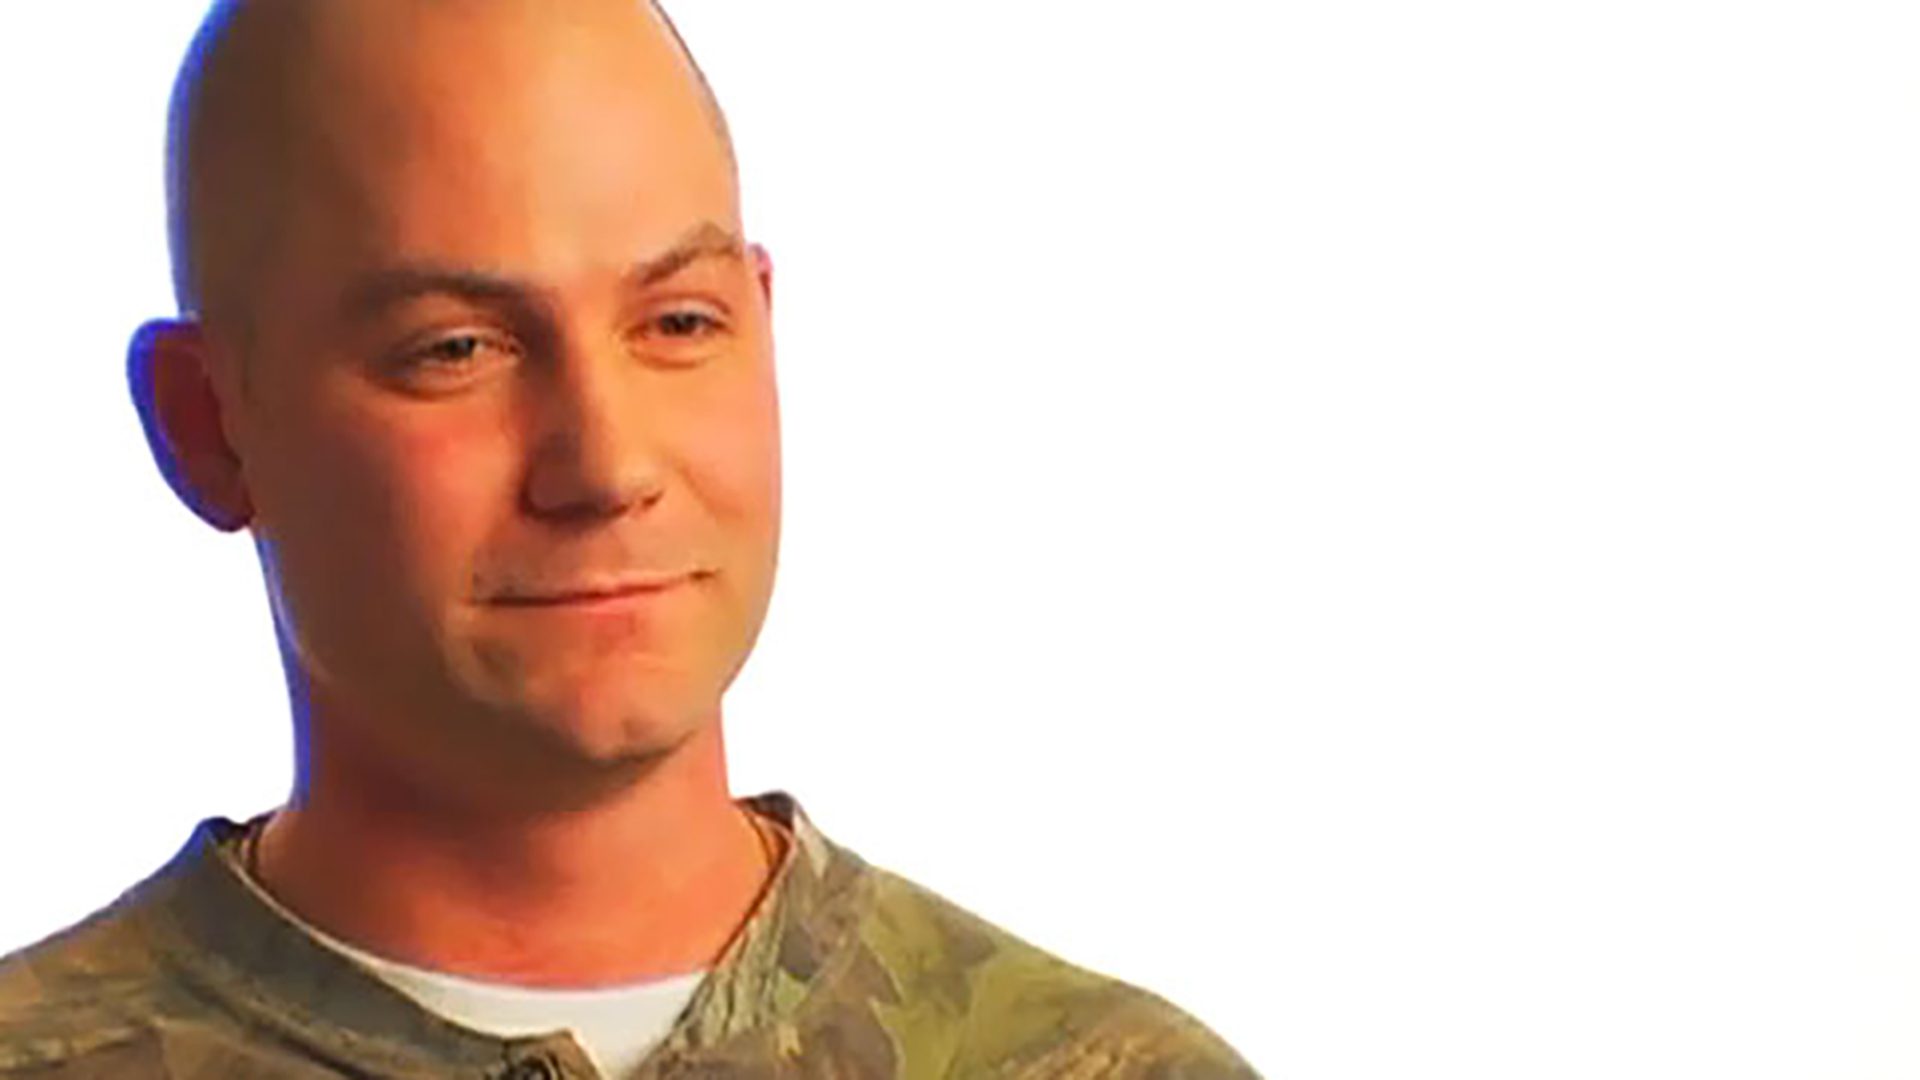 A bald adult man wearing a camo shirt is interviewed against a white background